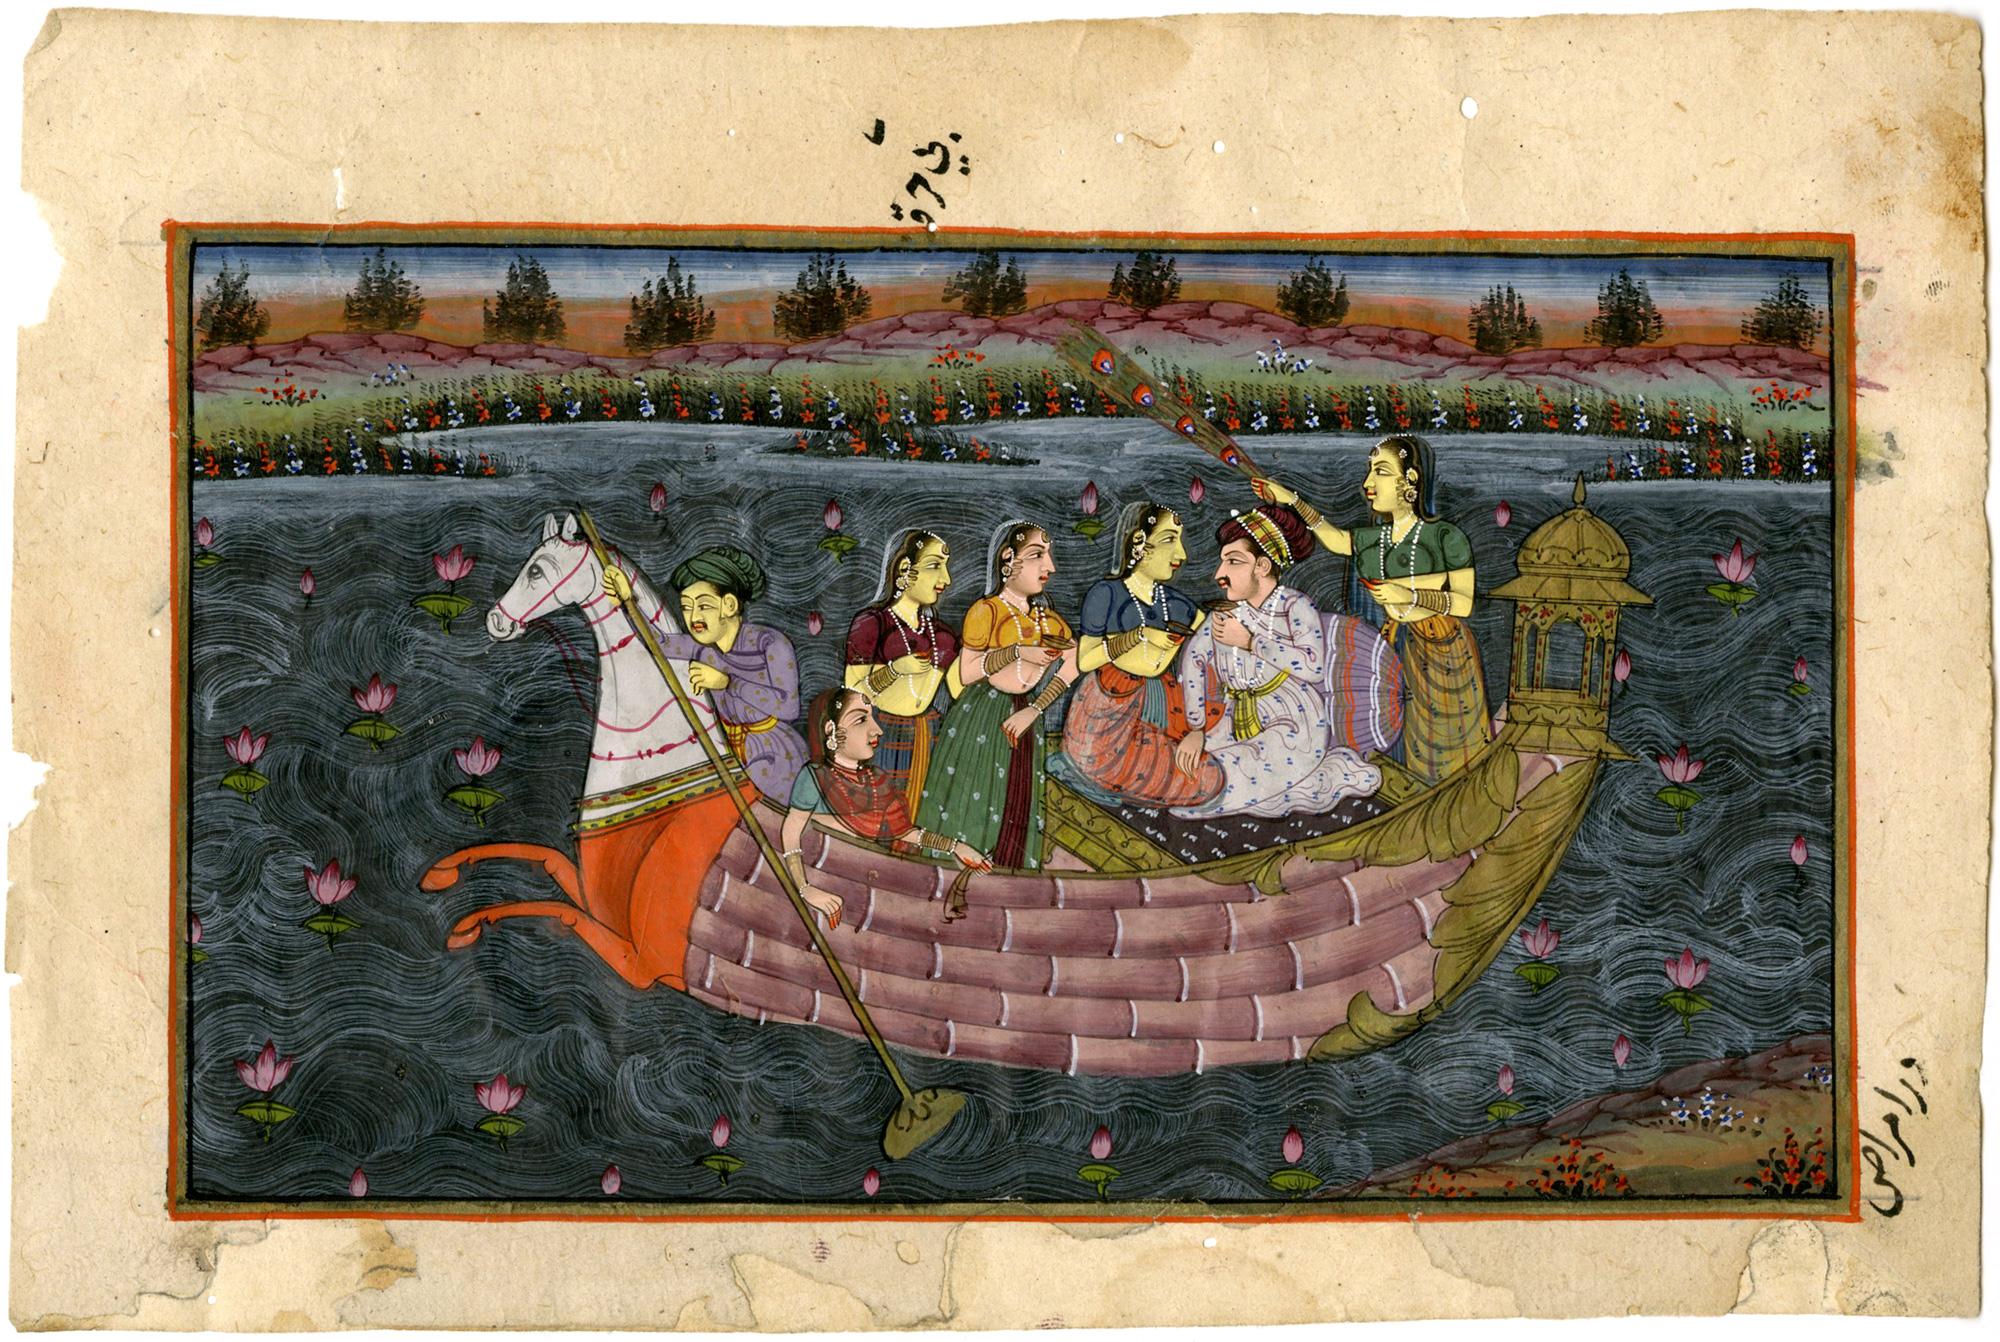 Unknown Portrait - Mughal School, 18th century Emperor Jangahir on a pleasure boat with his harem a